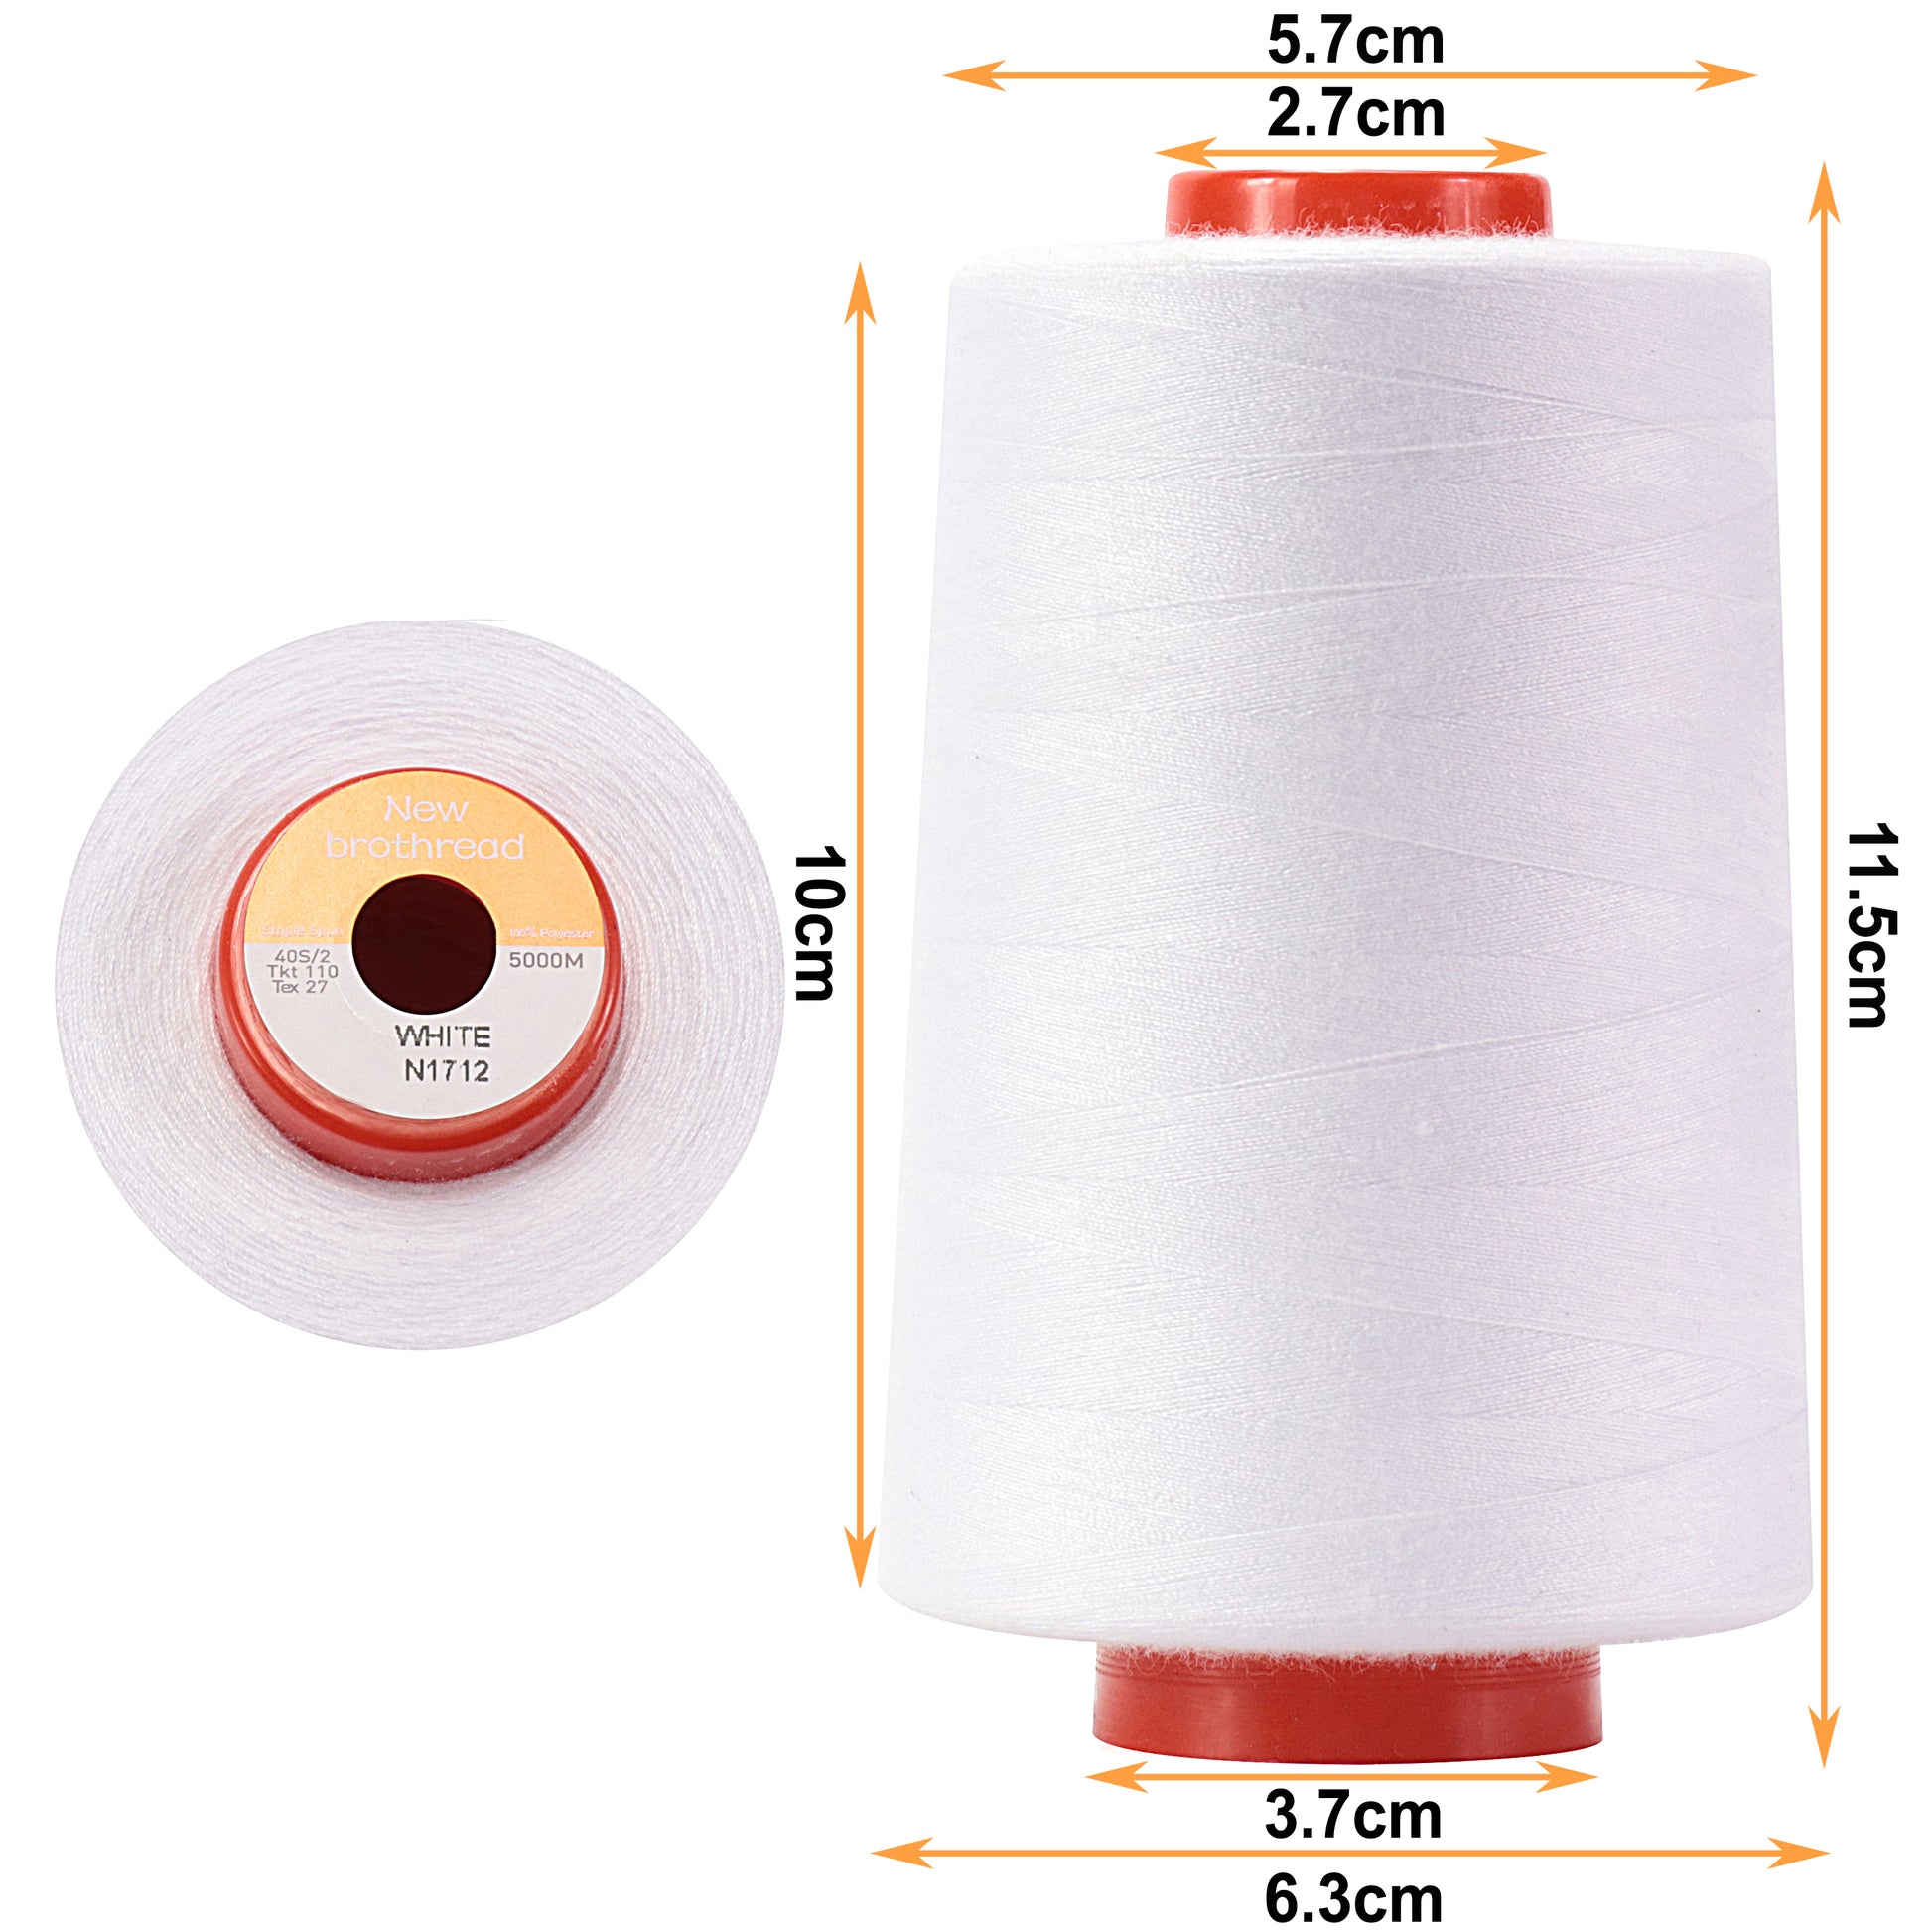 New brothread - 18 Options - Multi-Purpose 100% Mercerized Cotton Threads  50S/3 600M(660Y) Each Spool for Quilting, Serger, Sewing and Embroidery -  24